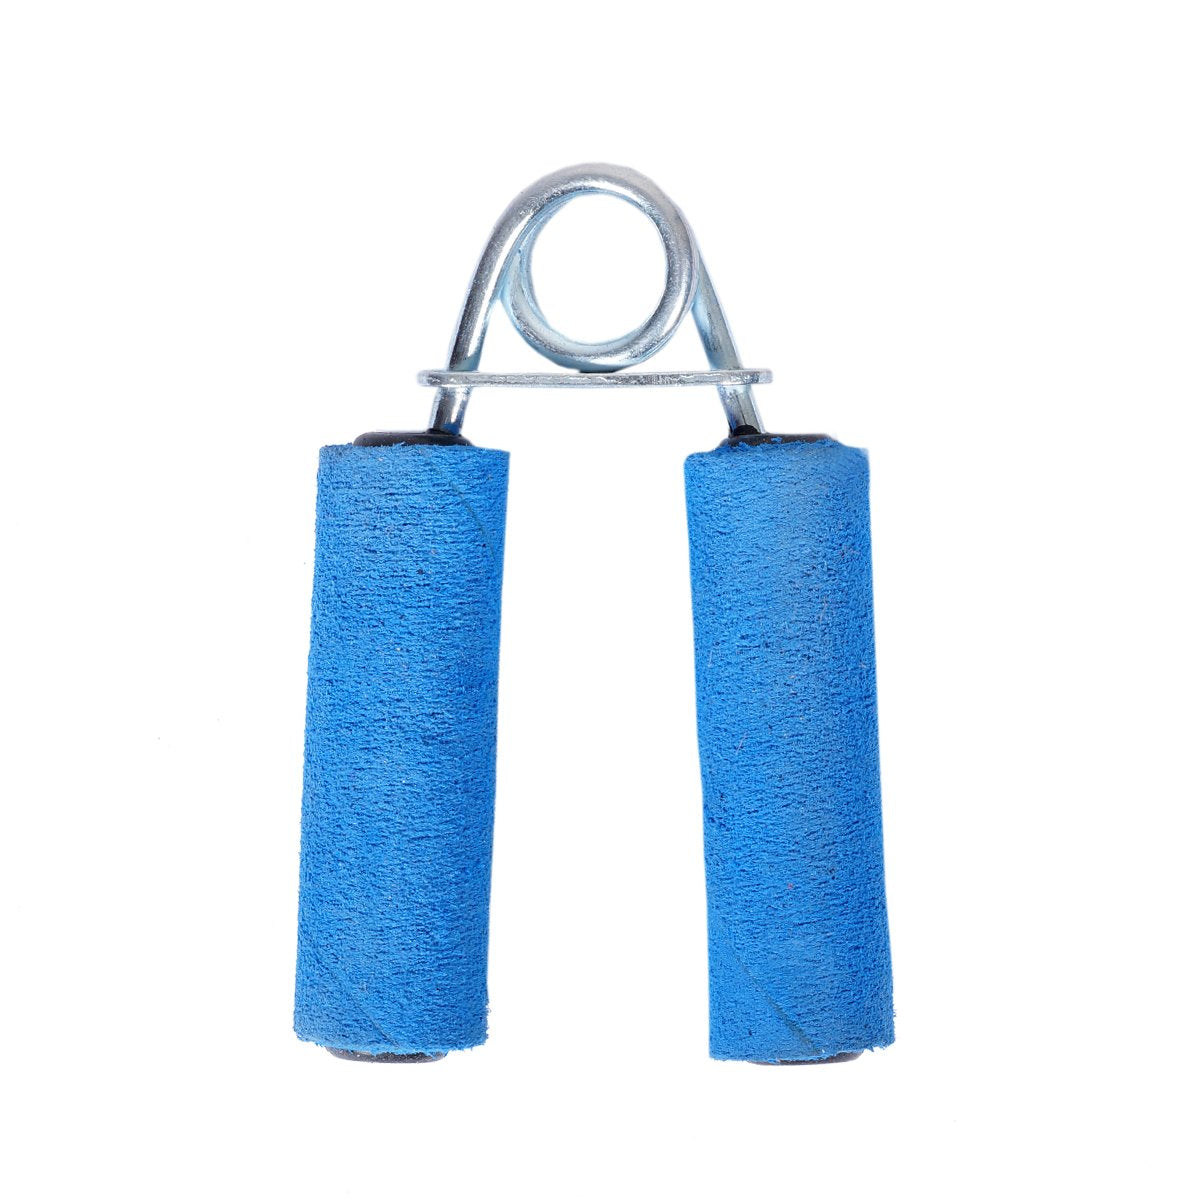 Foam Padded Fitness Hand Gripper Pack of 2 Pieces (Blue)